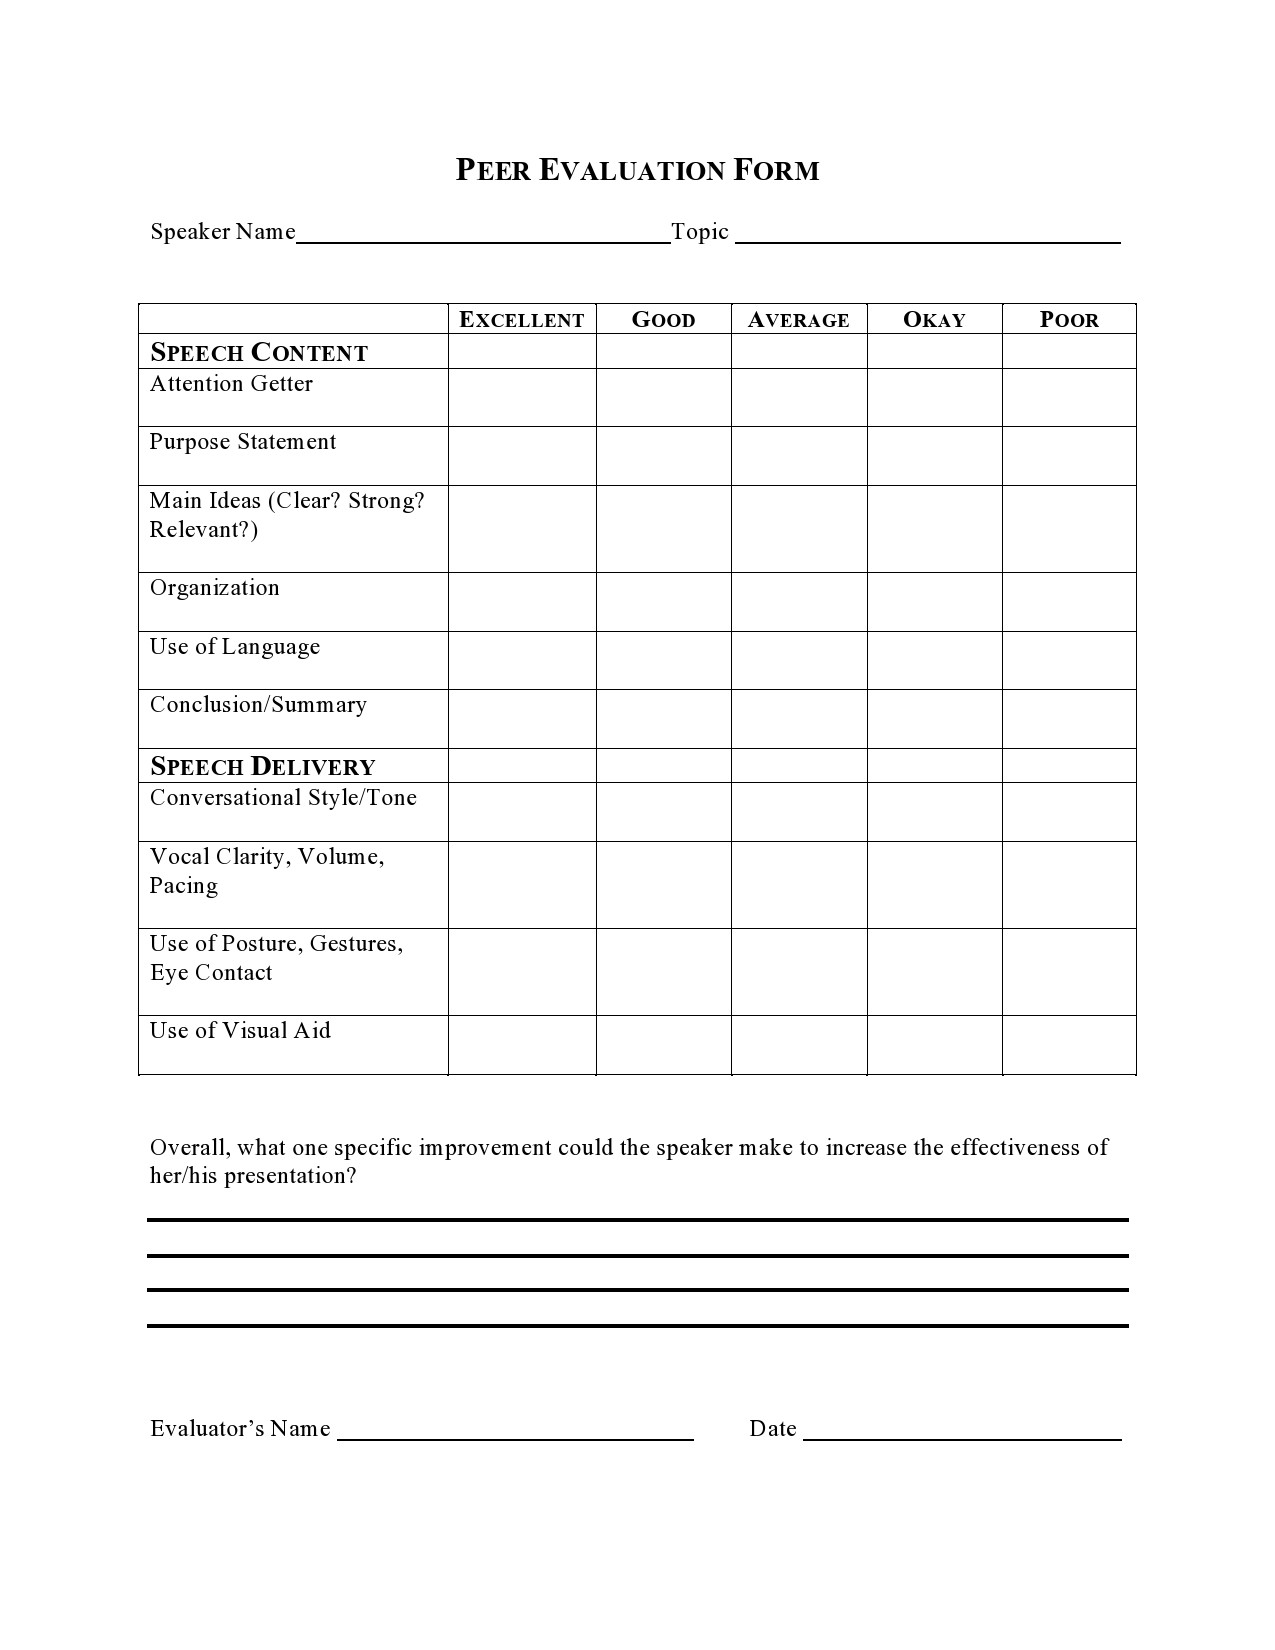 peer review form for presentations